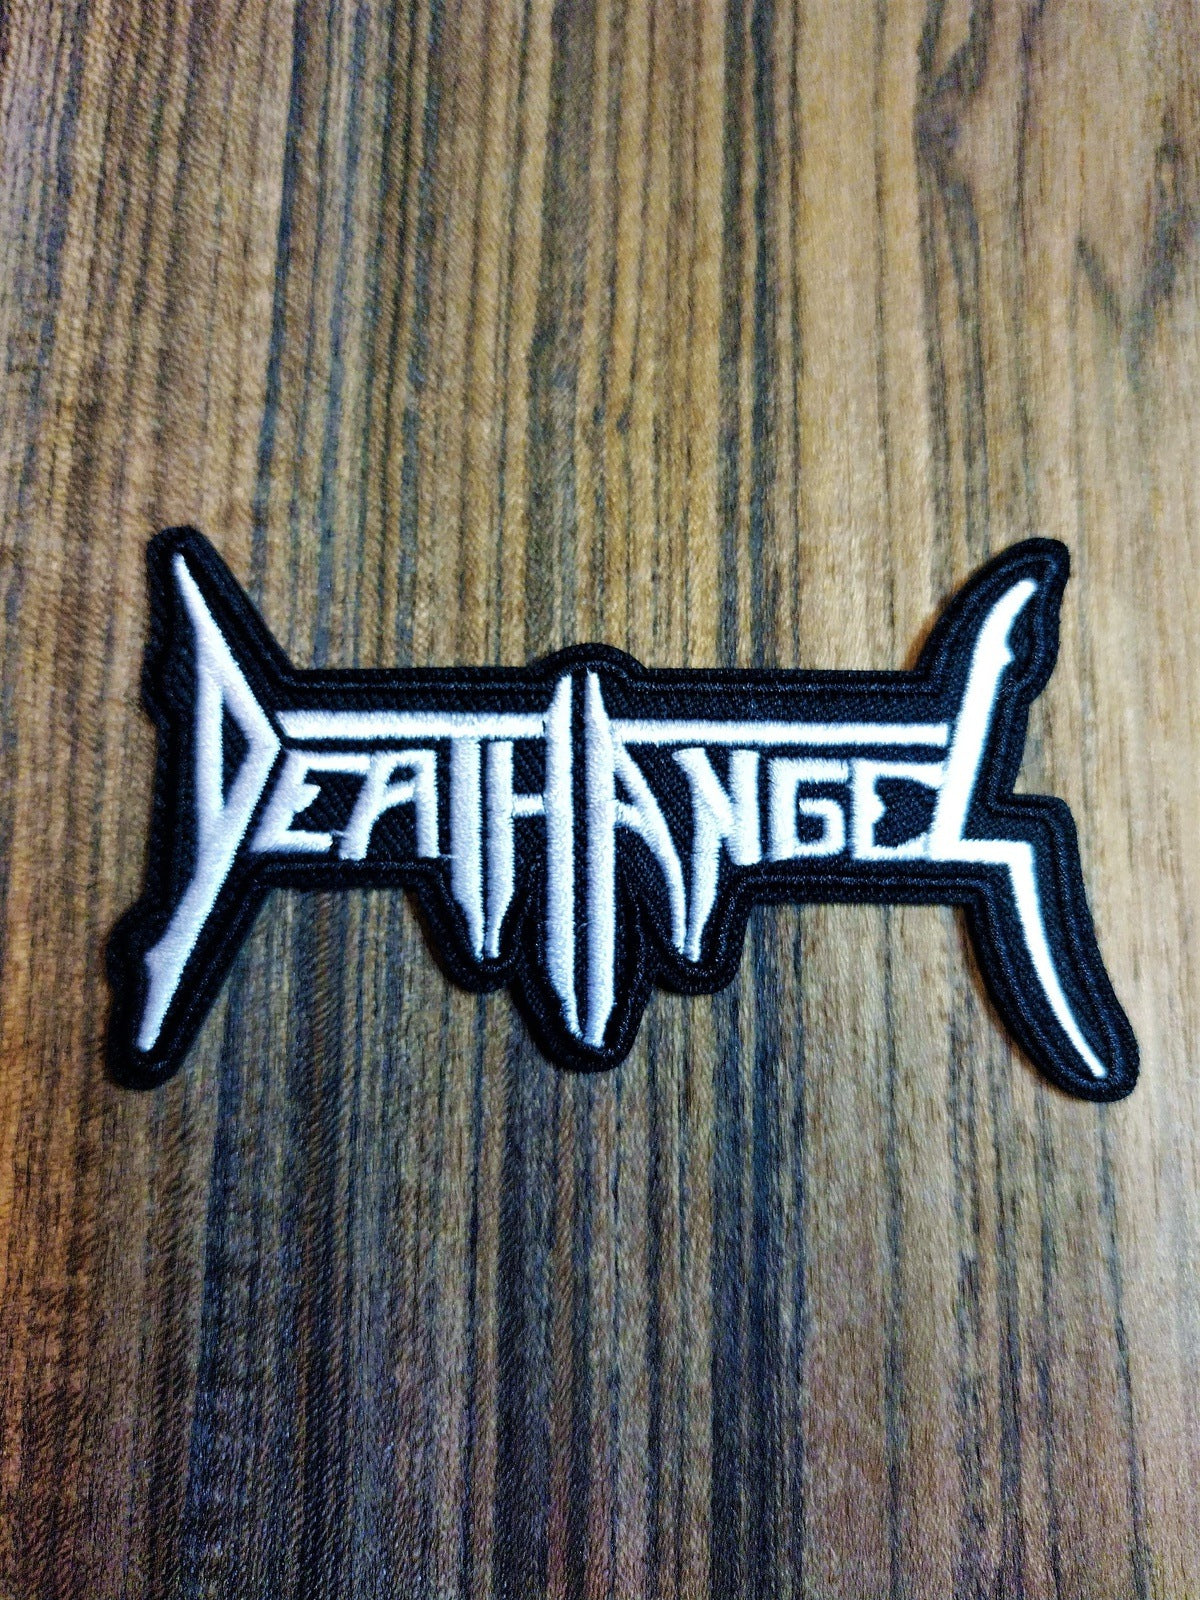 Death Angel Patch approx. 3.5 inches